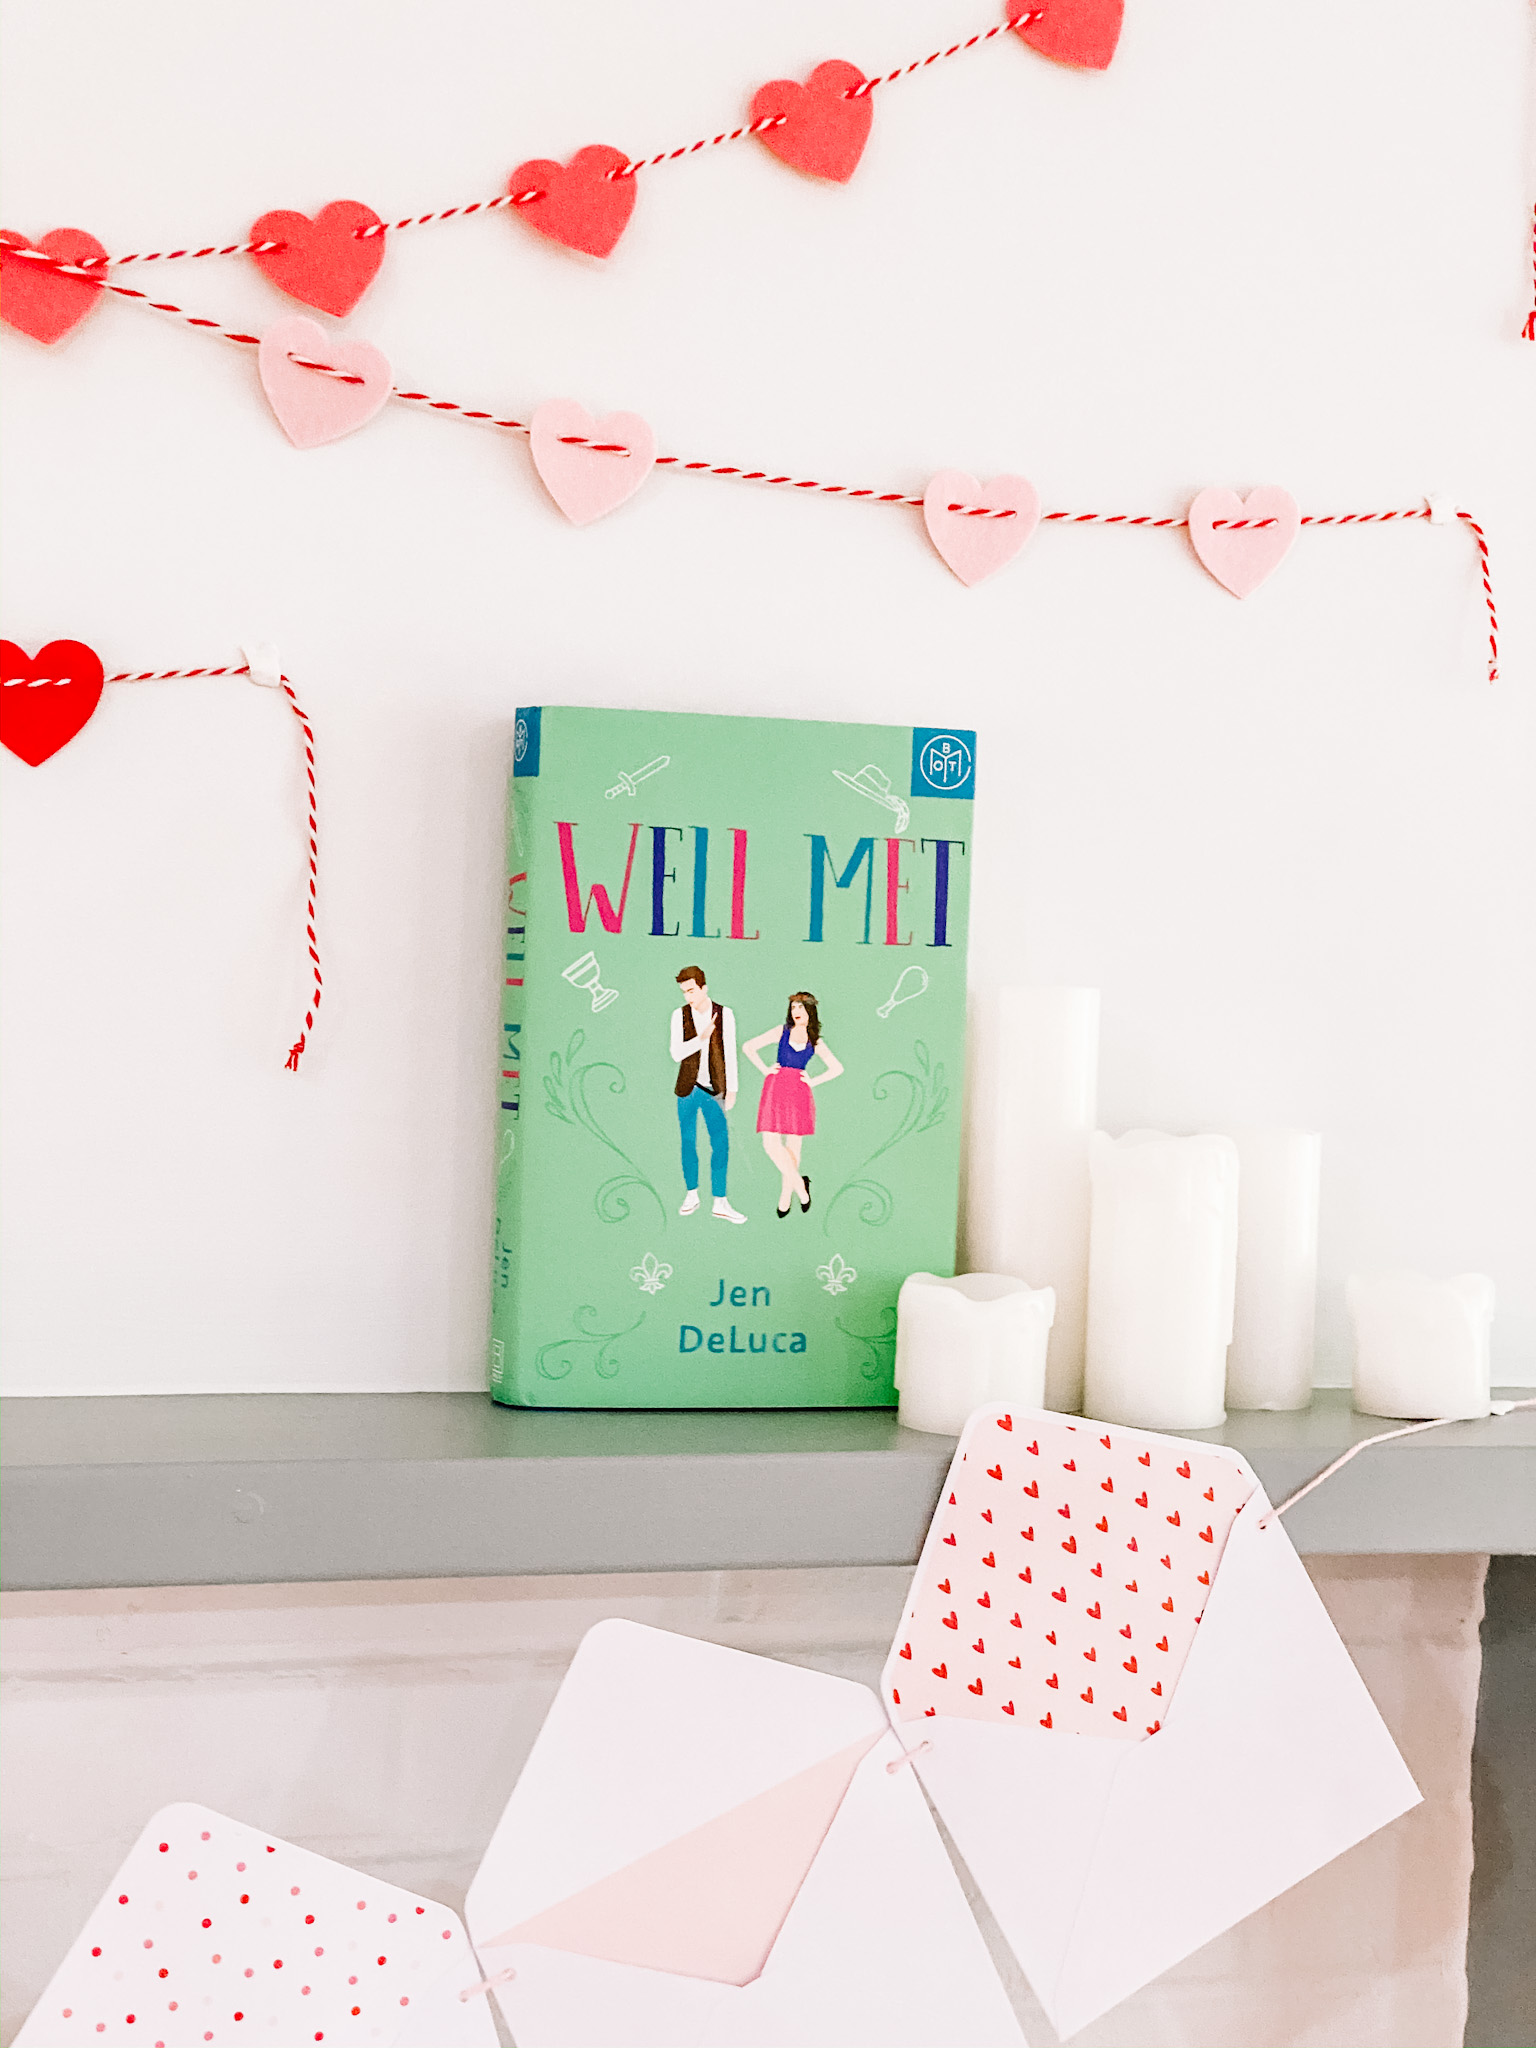 How to Host a Well Met Book Club or any other fun Galentine's Day Party.